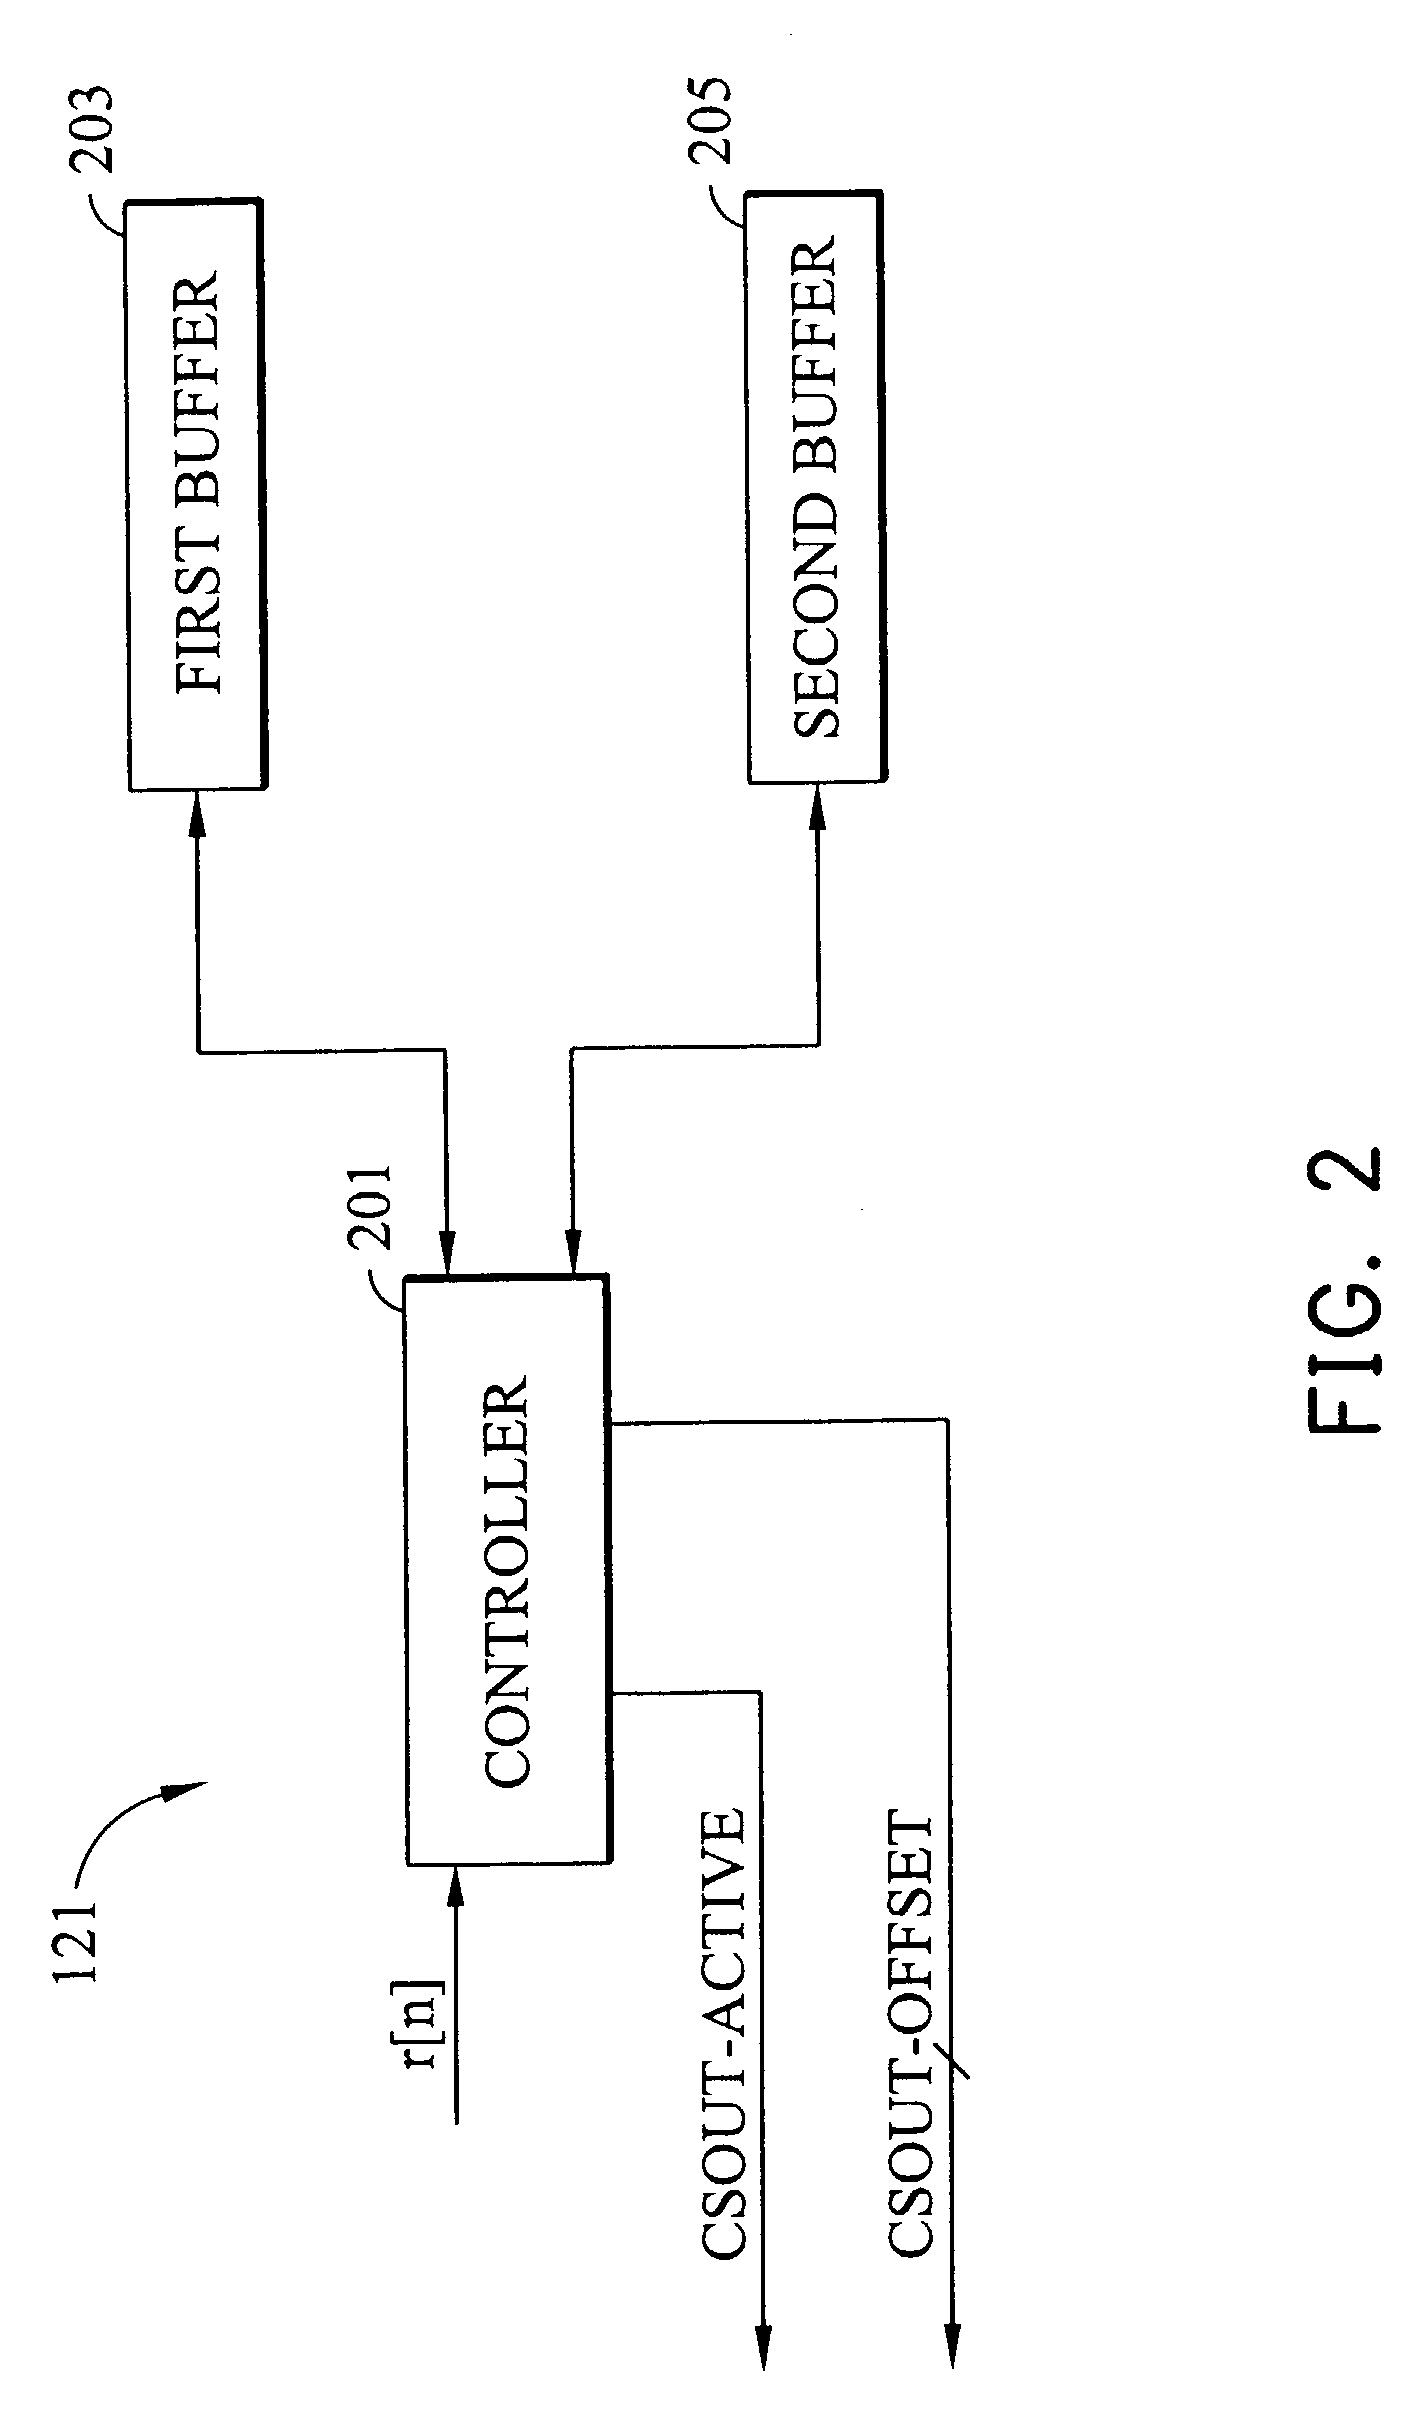 Frequency synchronization apparatus and method for OFDM systems